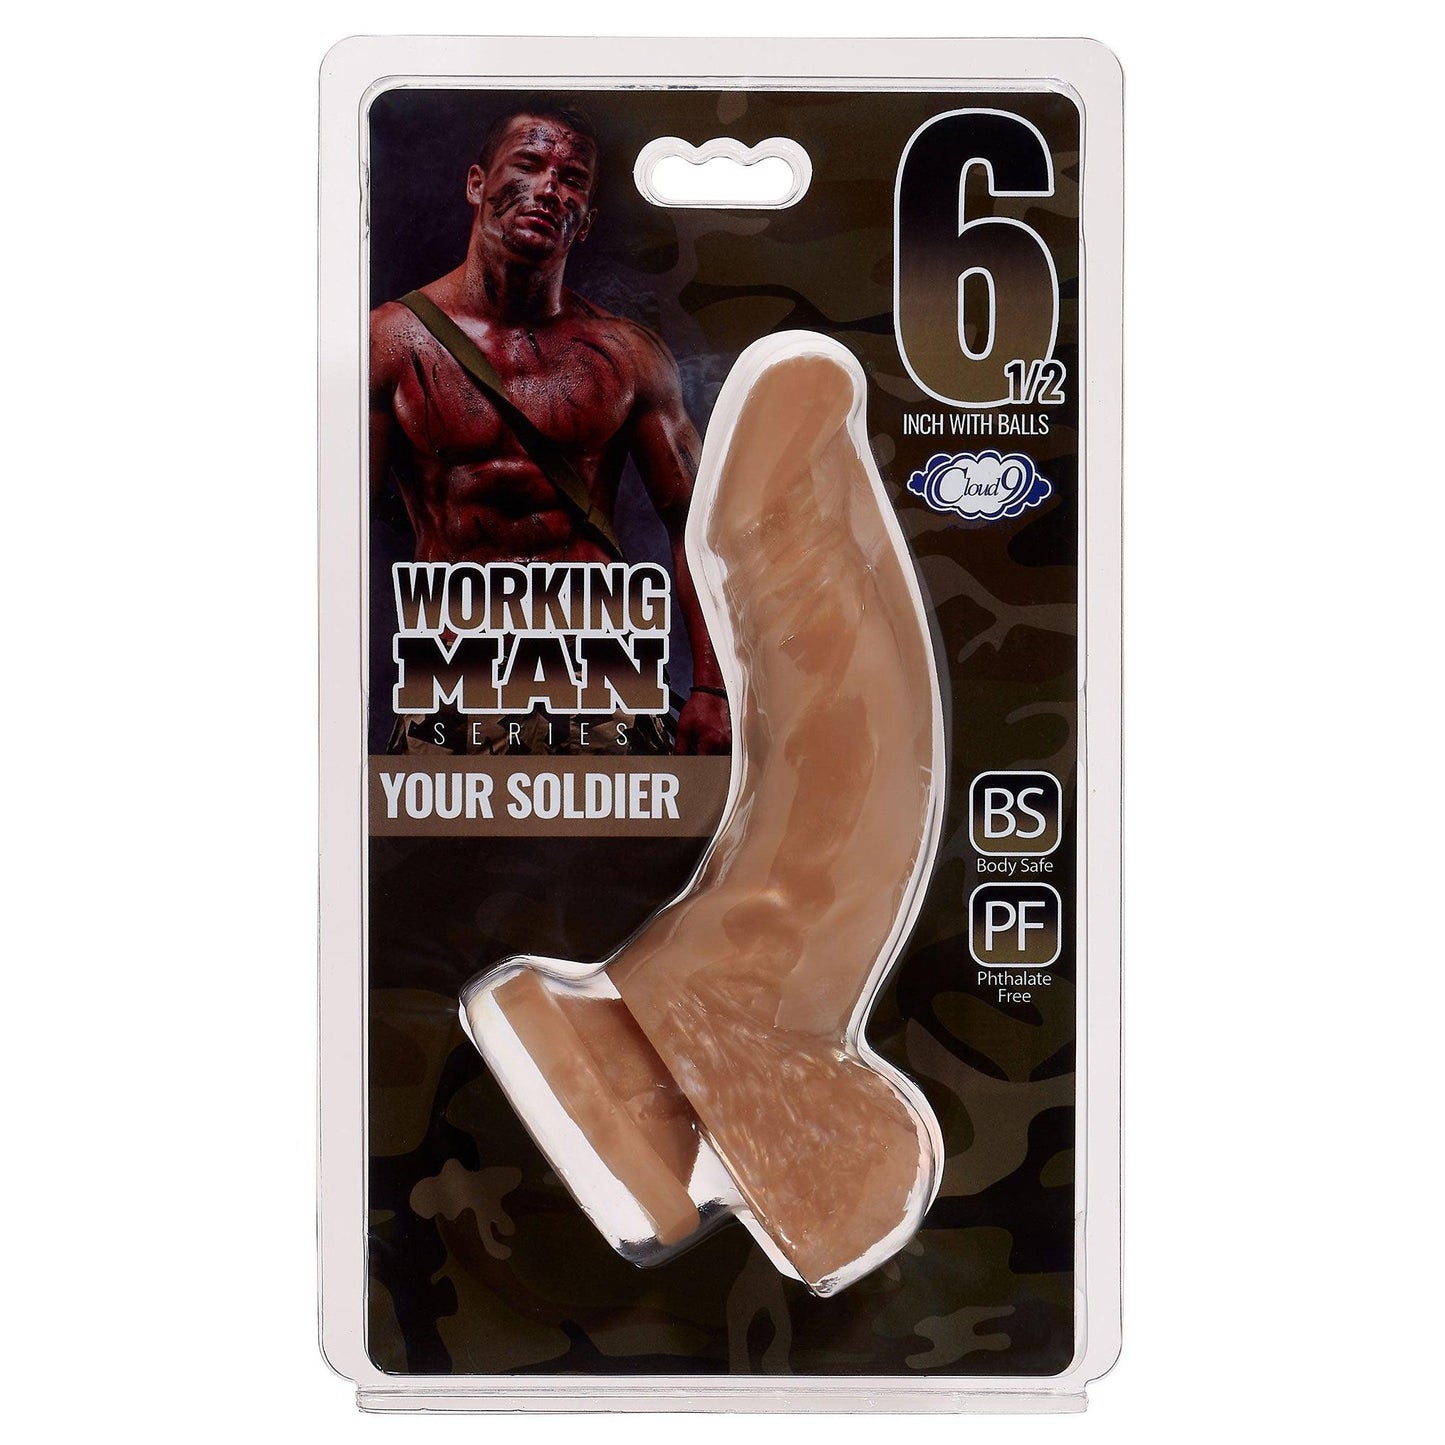 Cloud 9 Working Man 6.5 Inch With Balls - Your Soldier - Tan